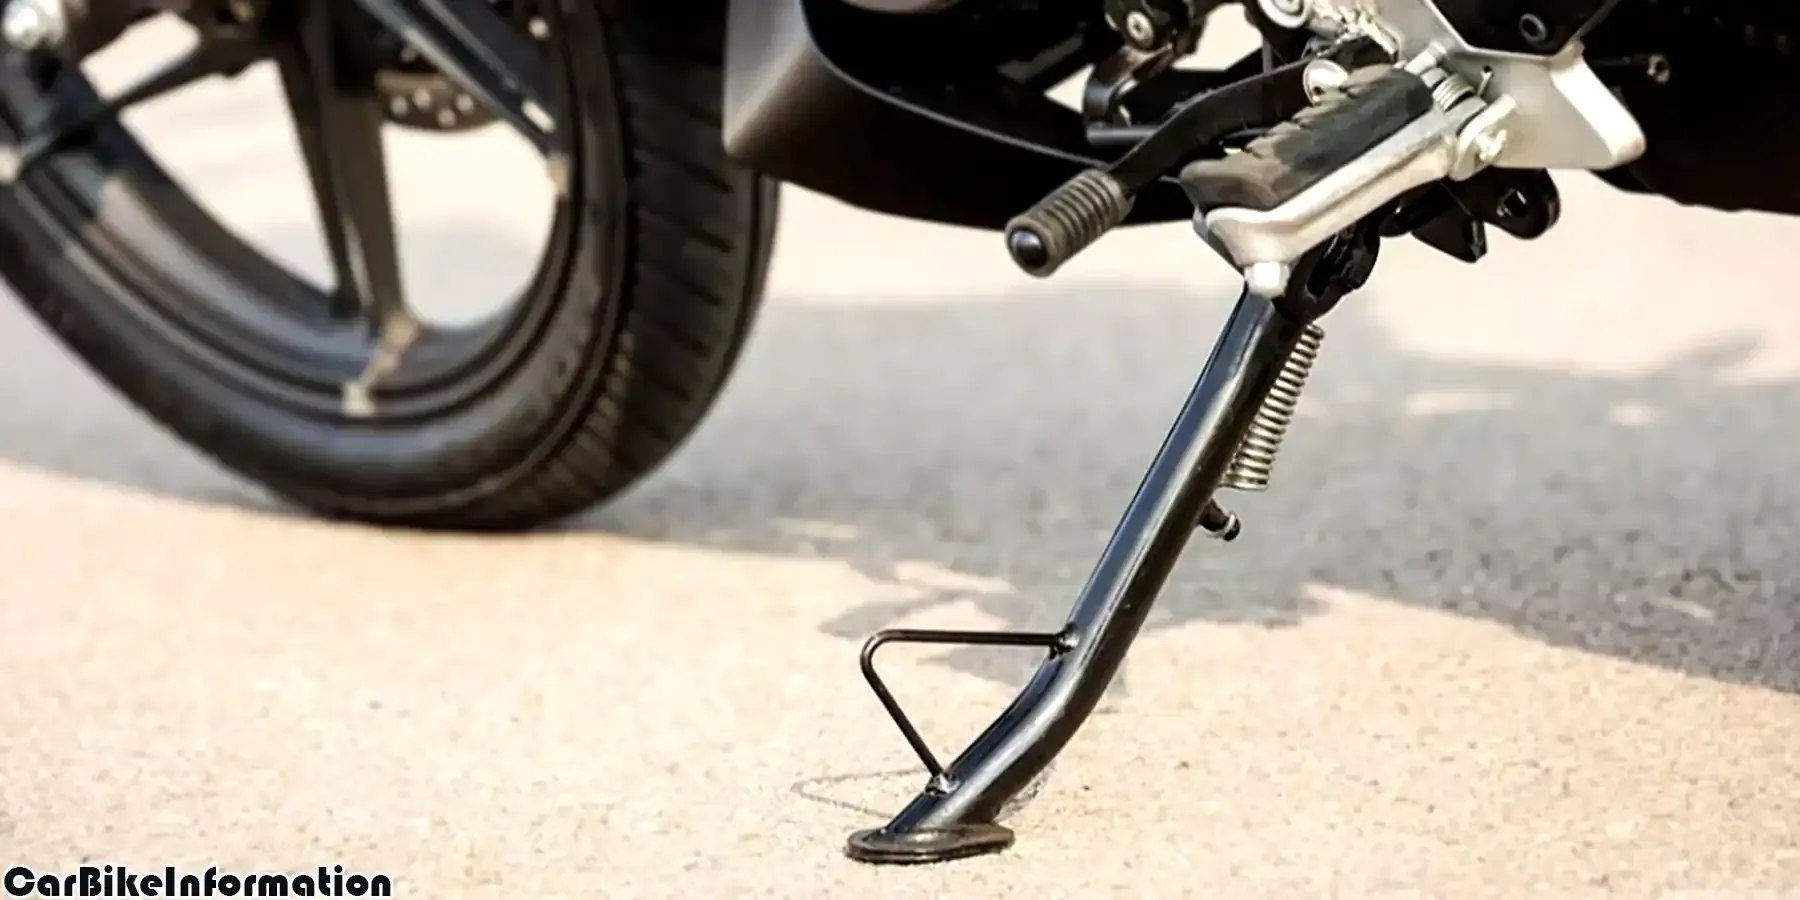 Hero Xtreme 125R Side Stand